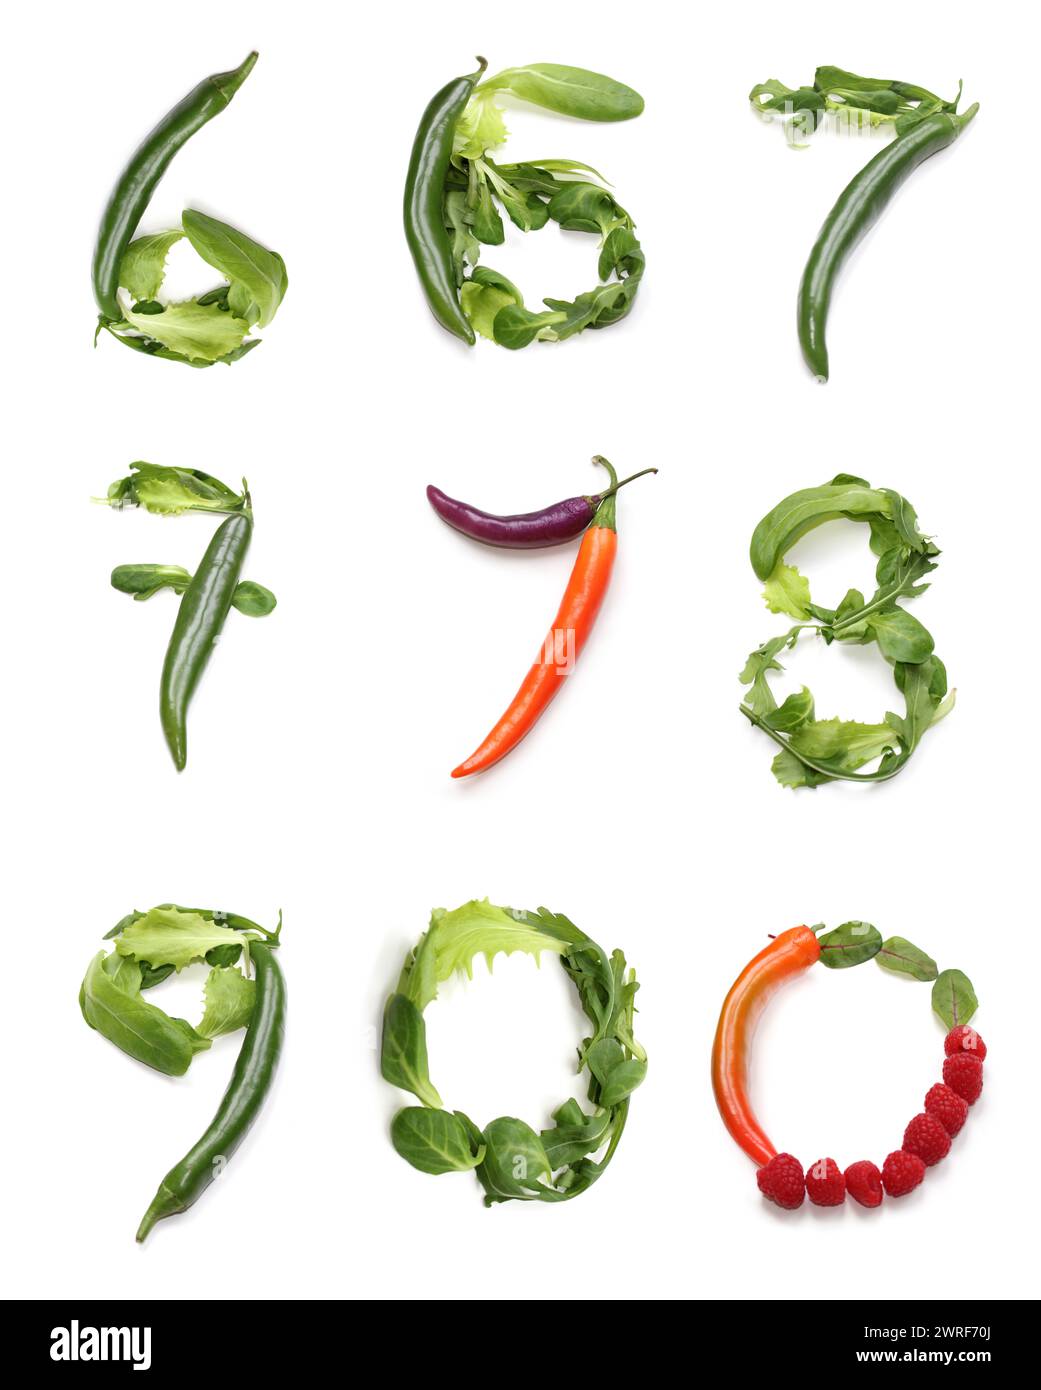 numbers 0 6 7 8 9 from green orange purple chili pepper, red berry and green salad lettuce leaf. vegan food number six, seven, nine, zero, letter O o Stock Photo